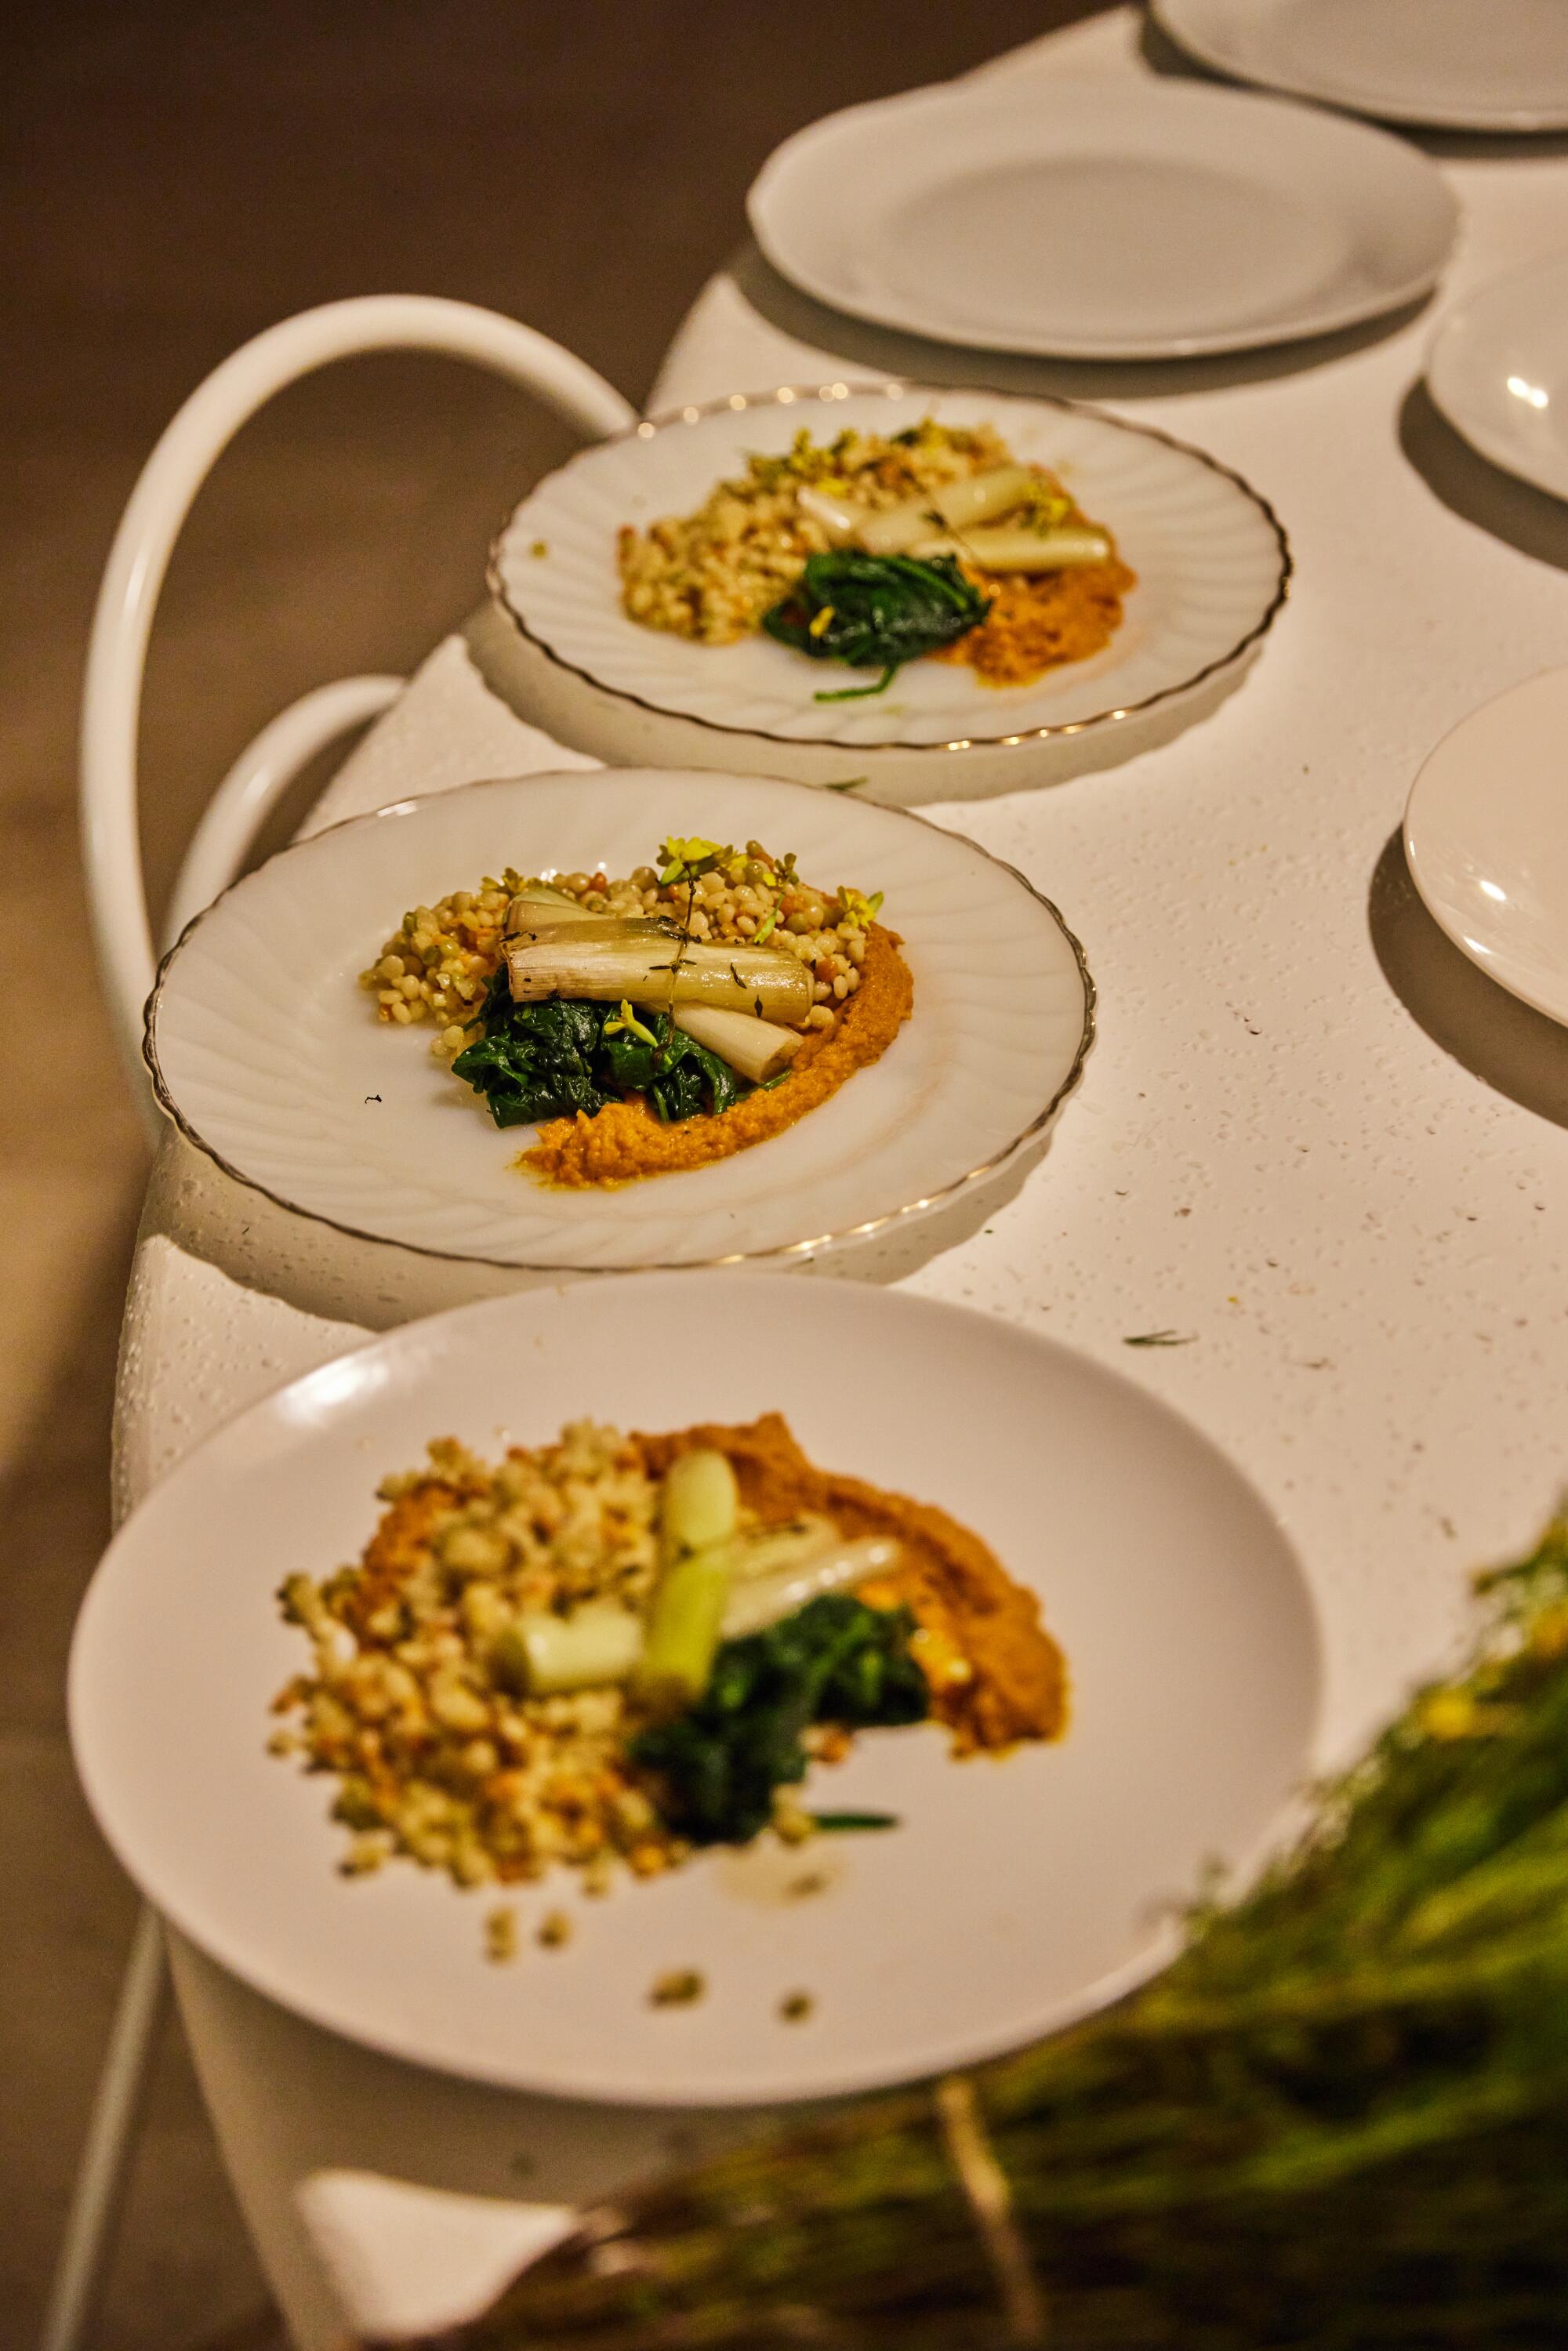 The main course: lemon and thyme couscous, carrot puree, sauteed spinach and braised leeks.